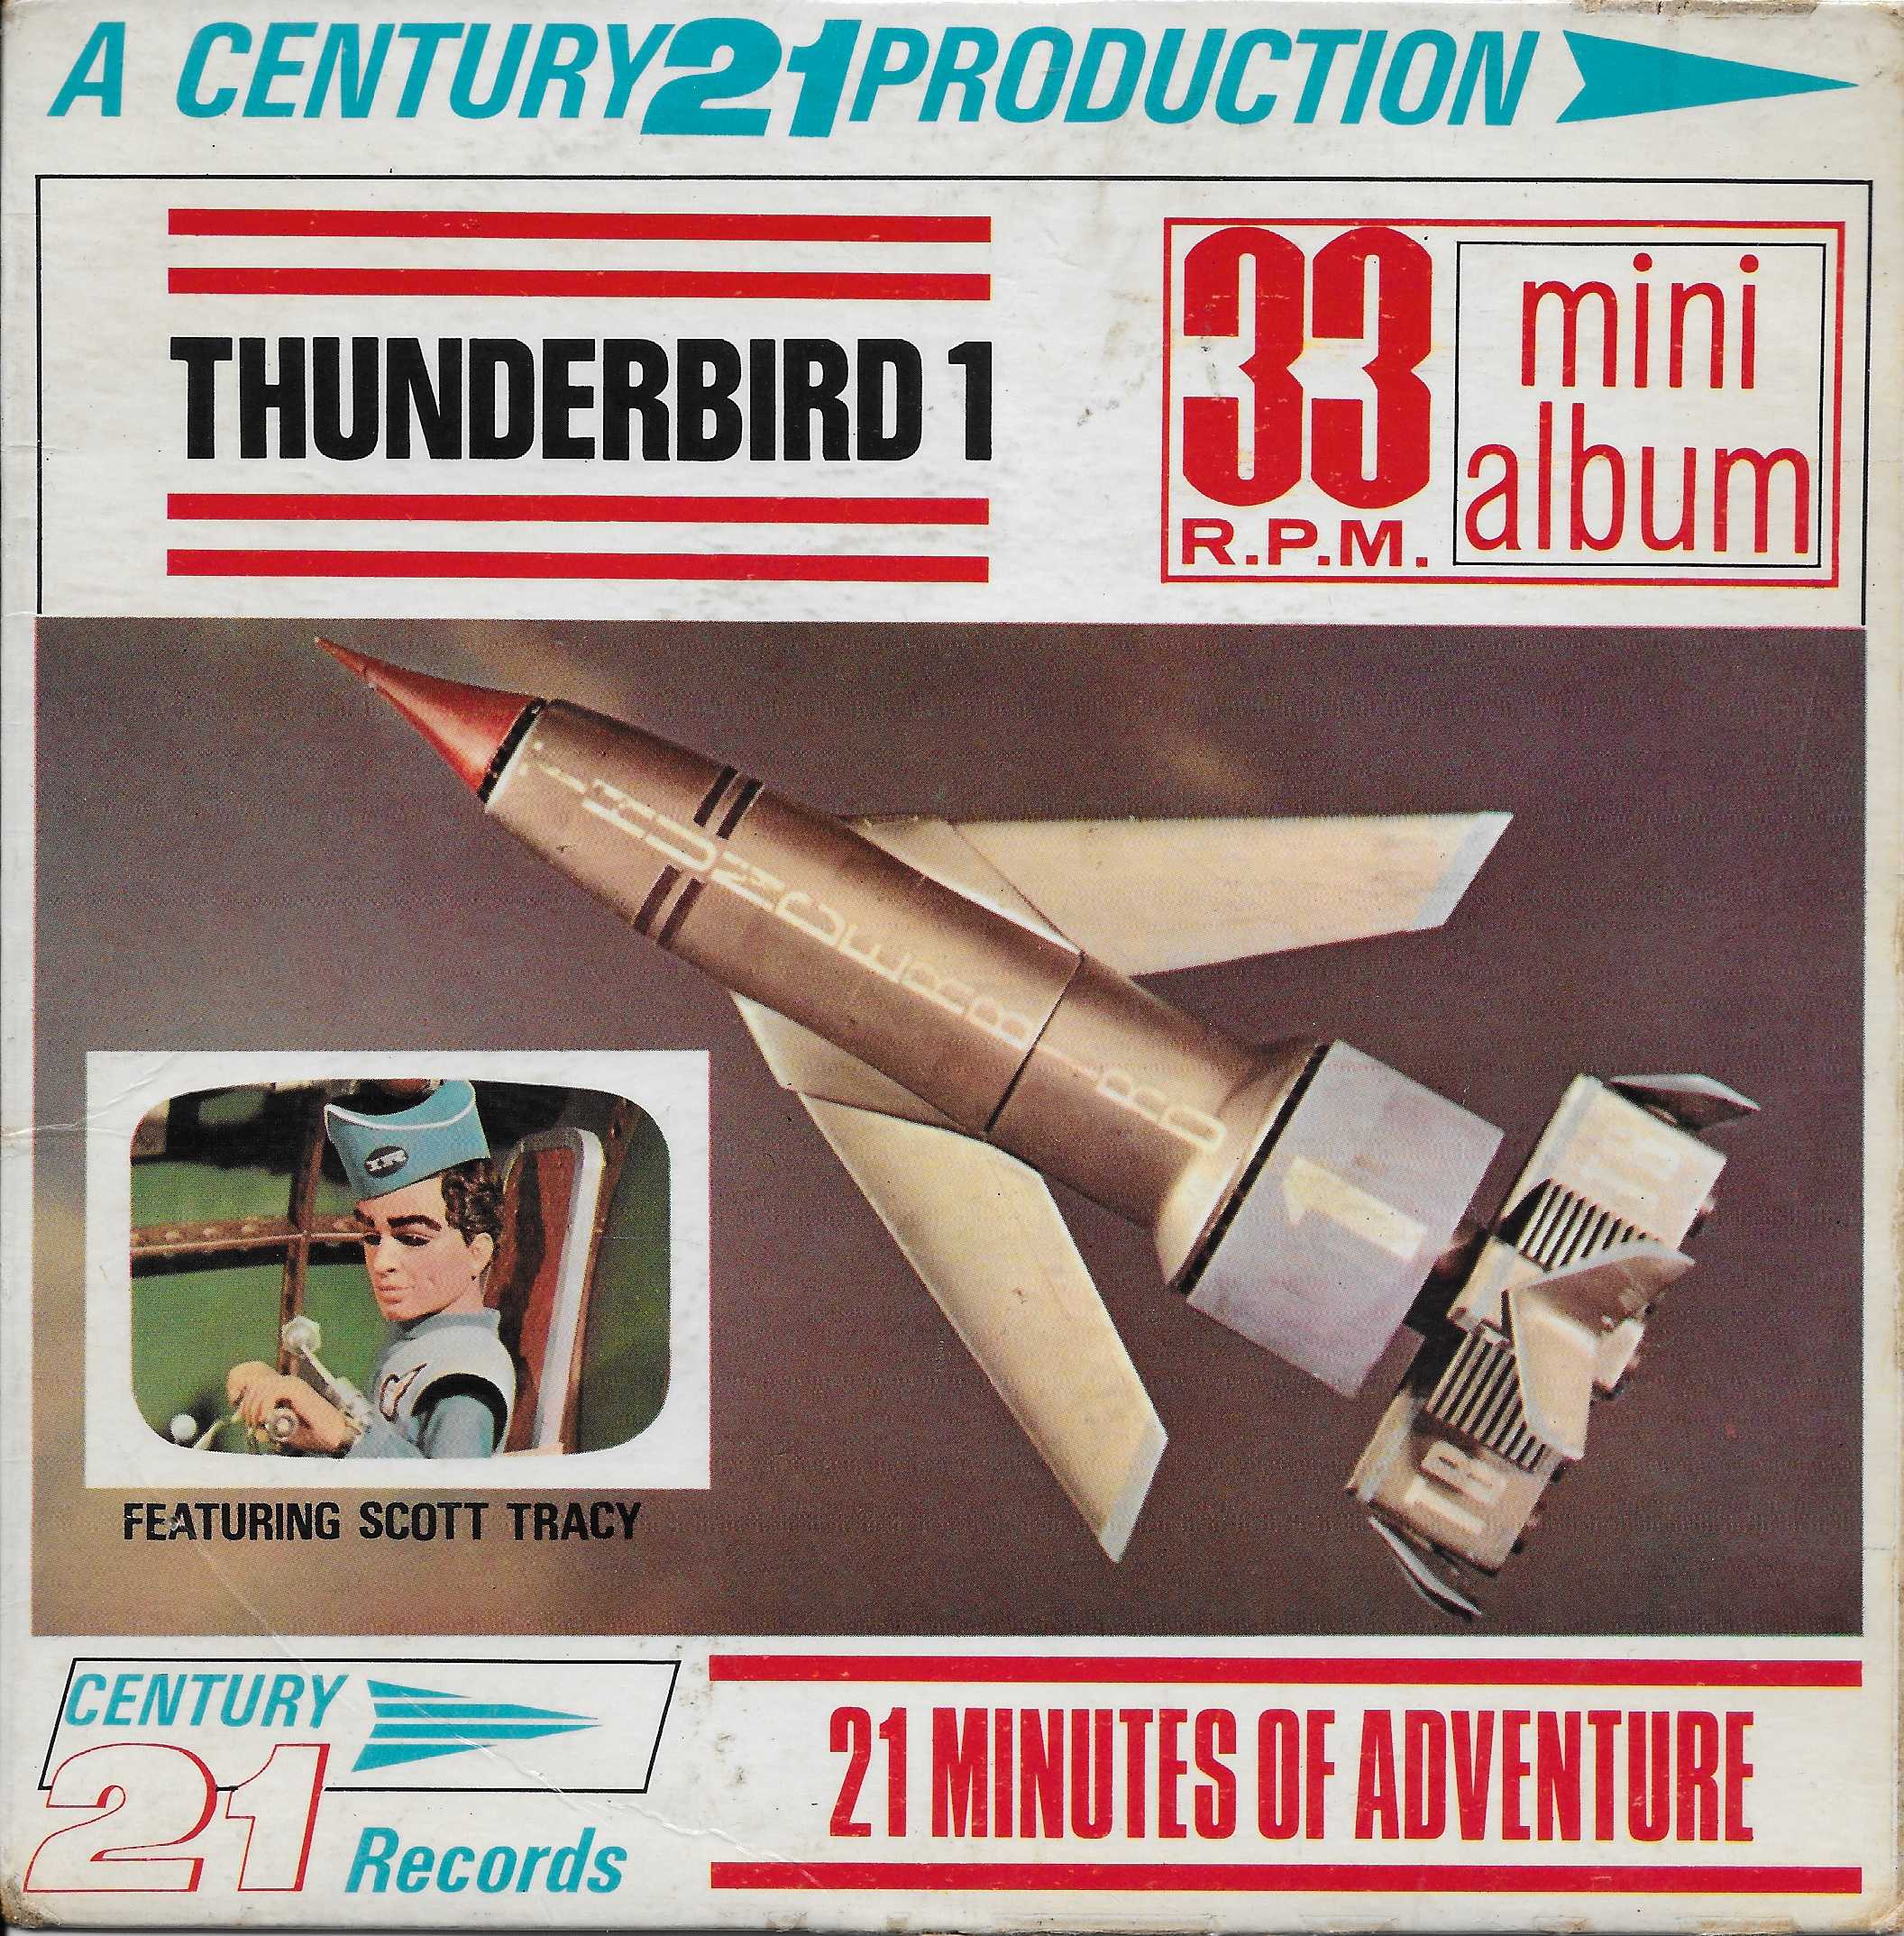 Picture of Thunderbird 1 by artist Gerry Anderson / Sylvia Anderson / Barry Gray from ITV, Channel 4 and Channel 5 singles library